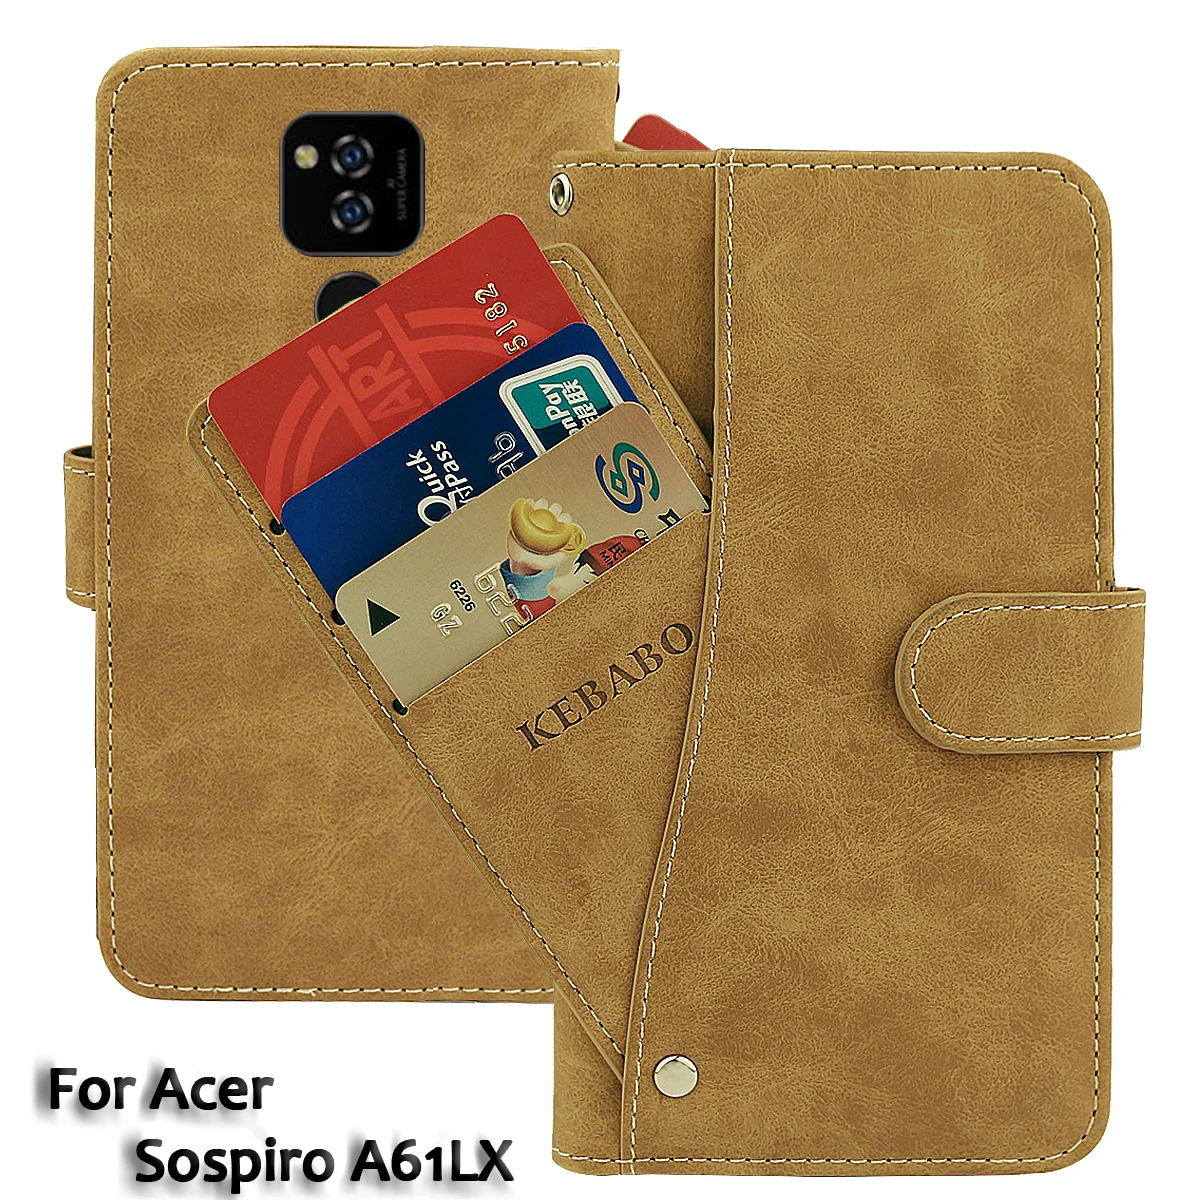 

Vintage Leather Wallet For Acer Sospiro A61LX Case 6.08" Flip Luxury Card Slots Cover Magnet Phone Protective Cases Bags